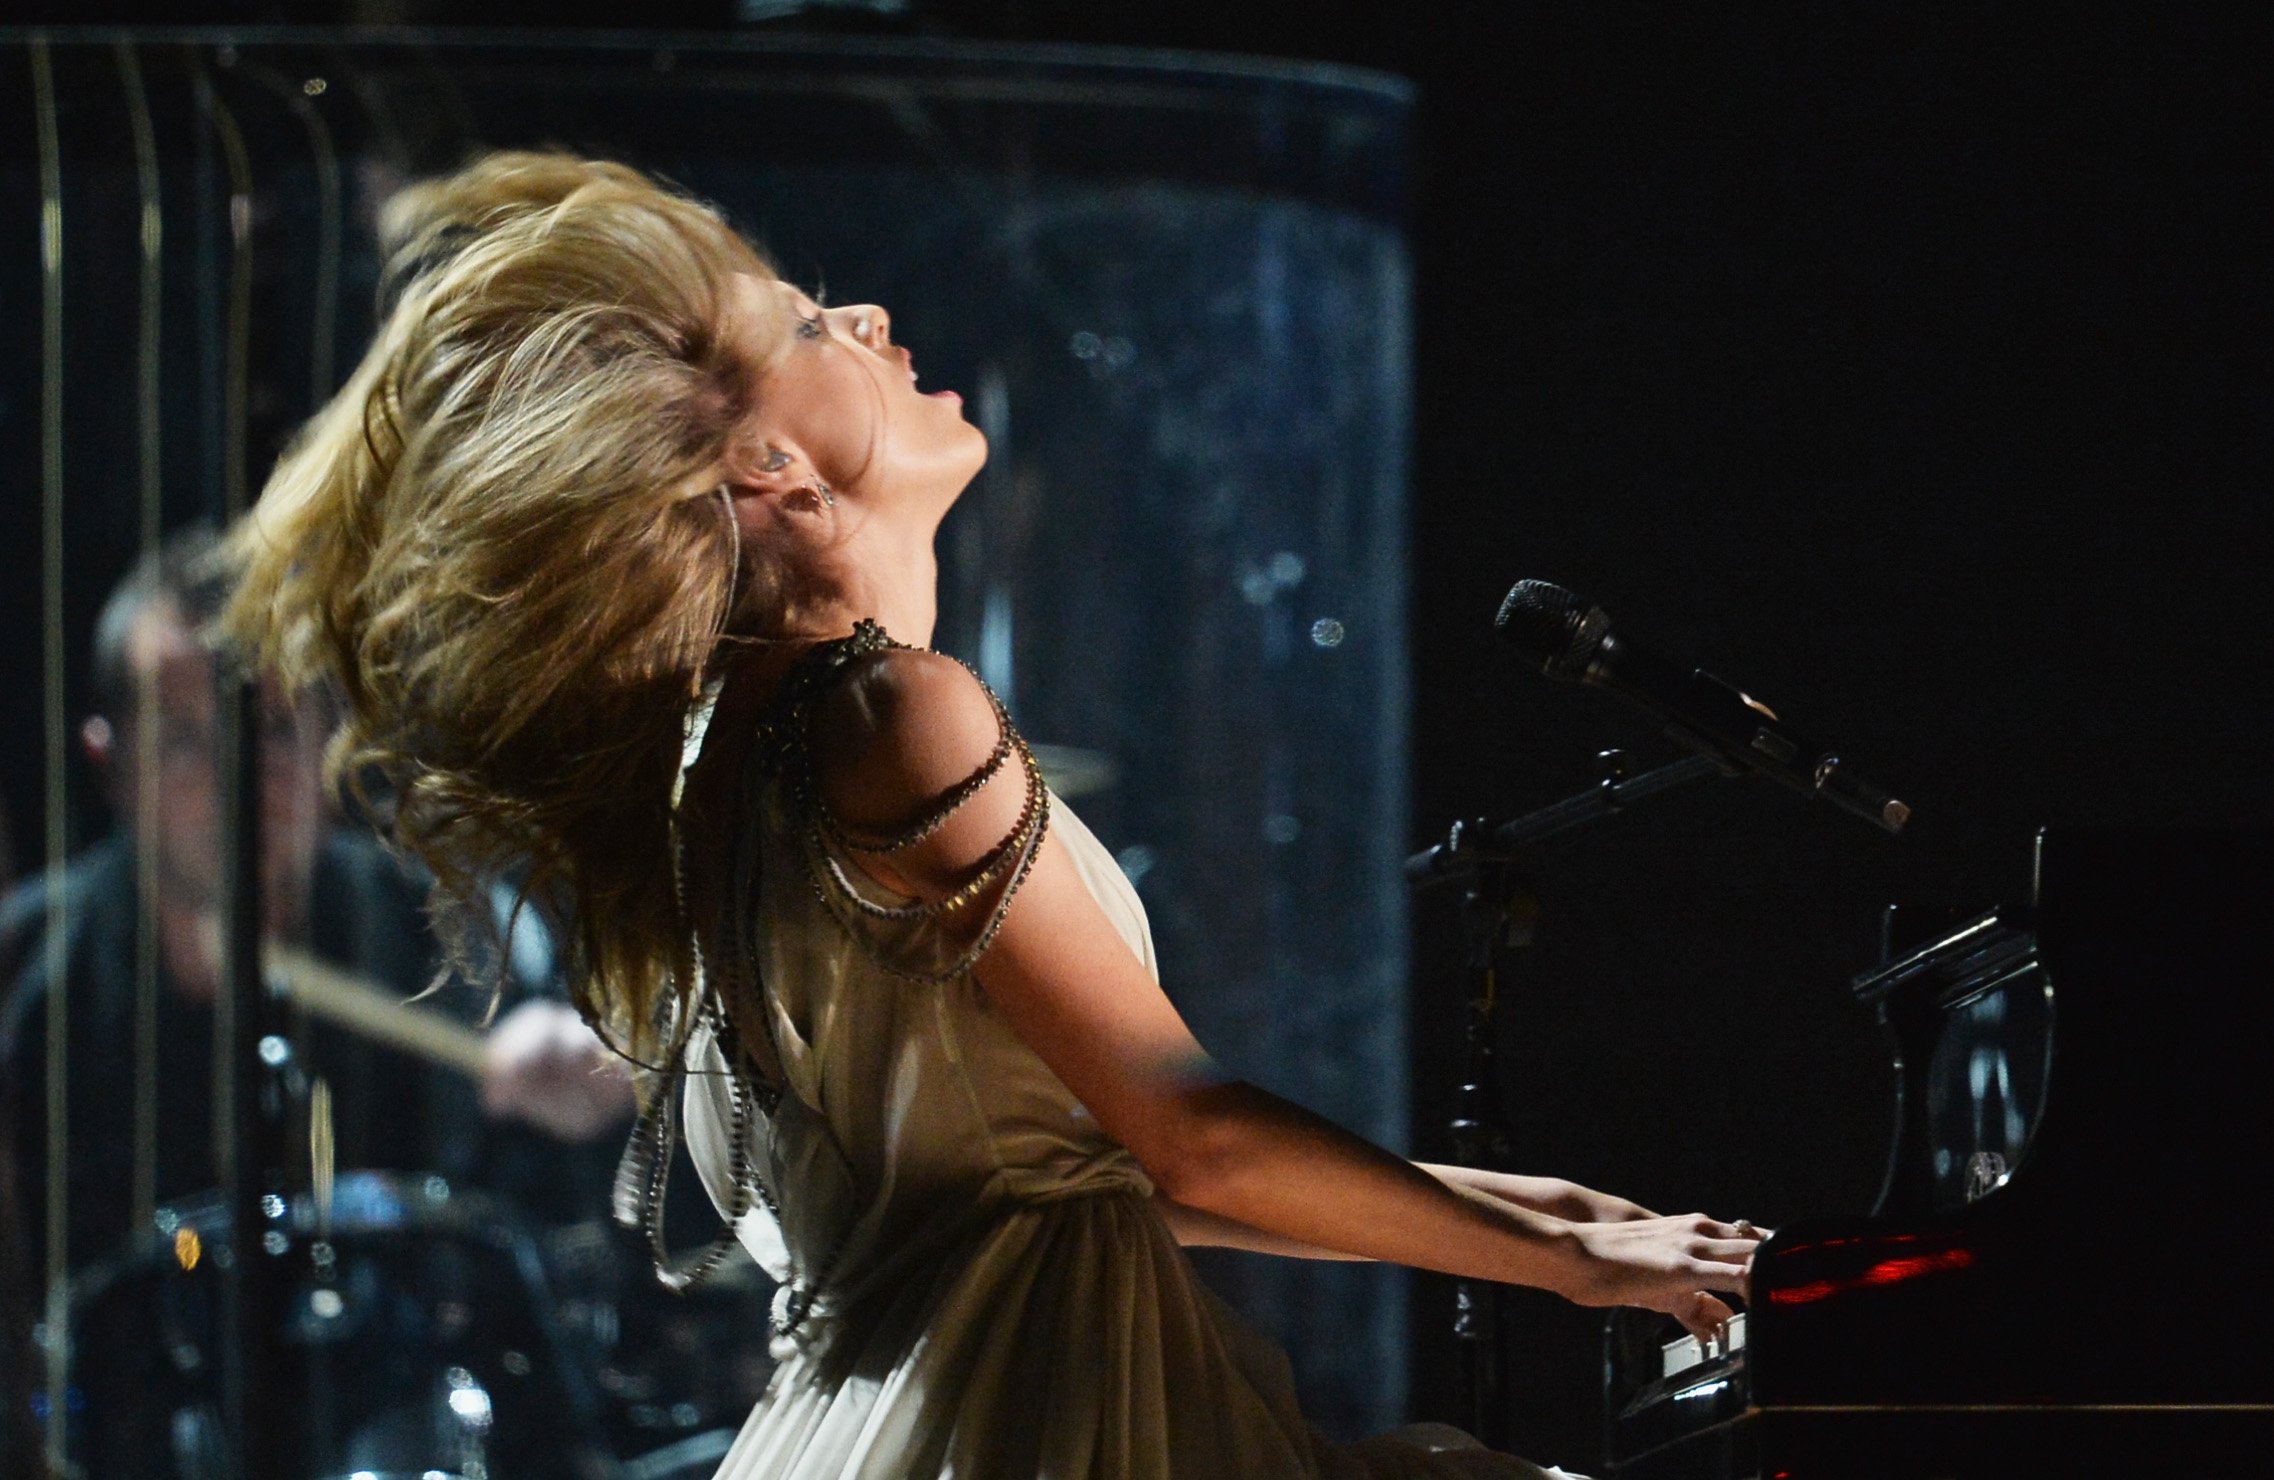 Taylor Swift performs "All Too Well" during the 56th GRAMMY Awards at Staples Center on Jan. 26, 2014.